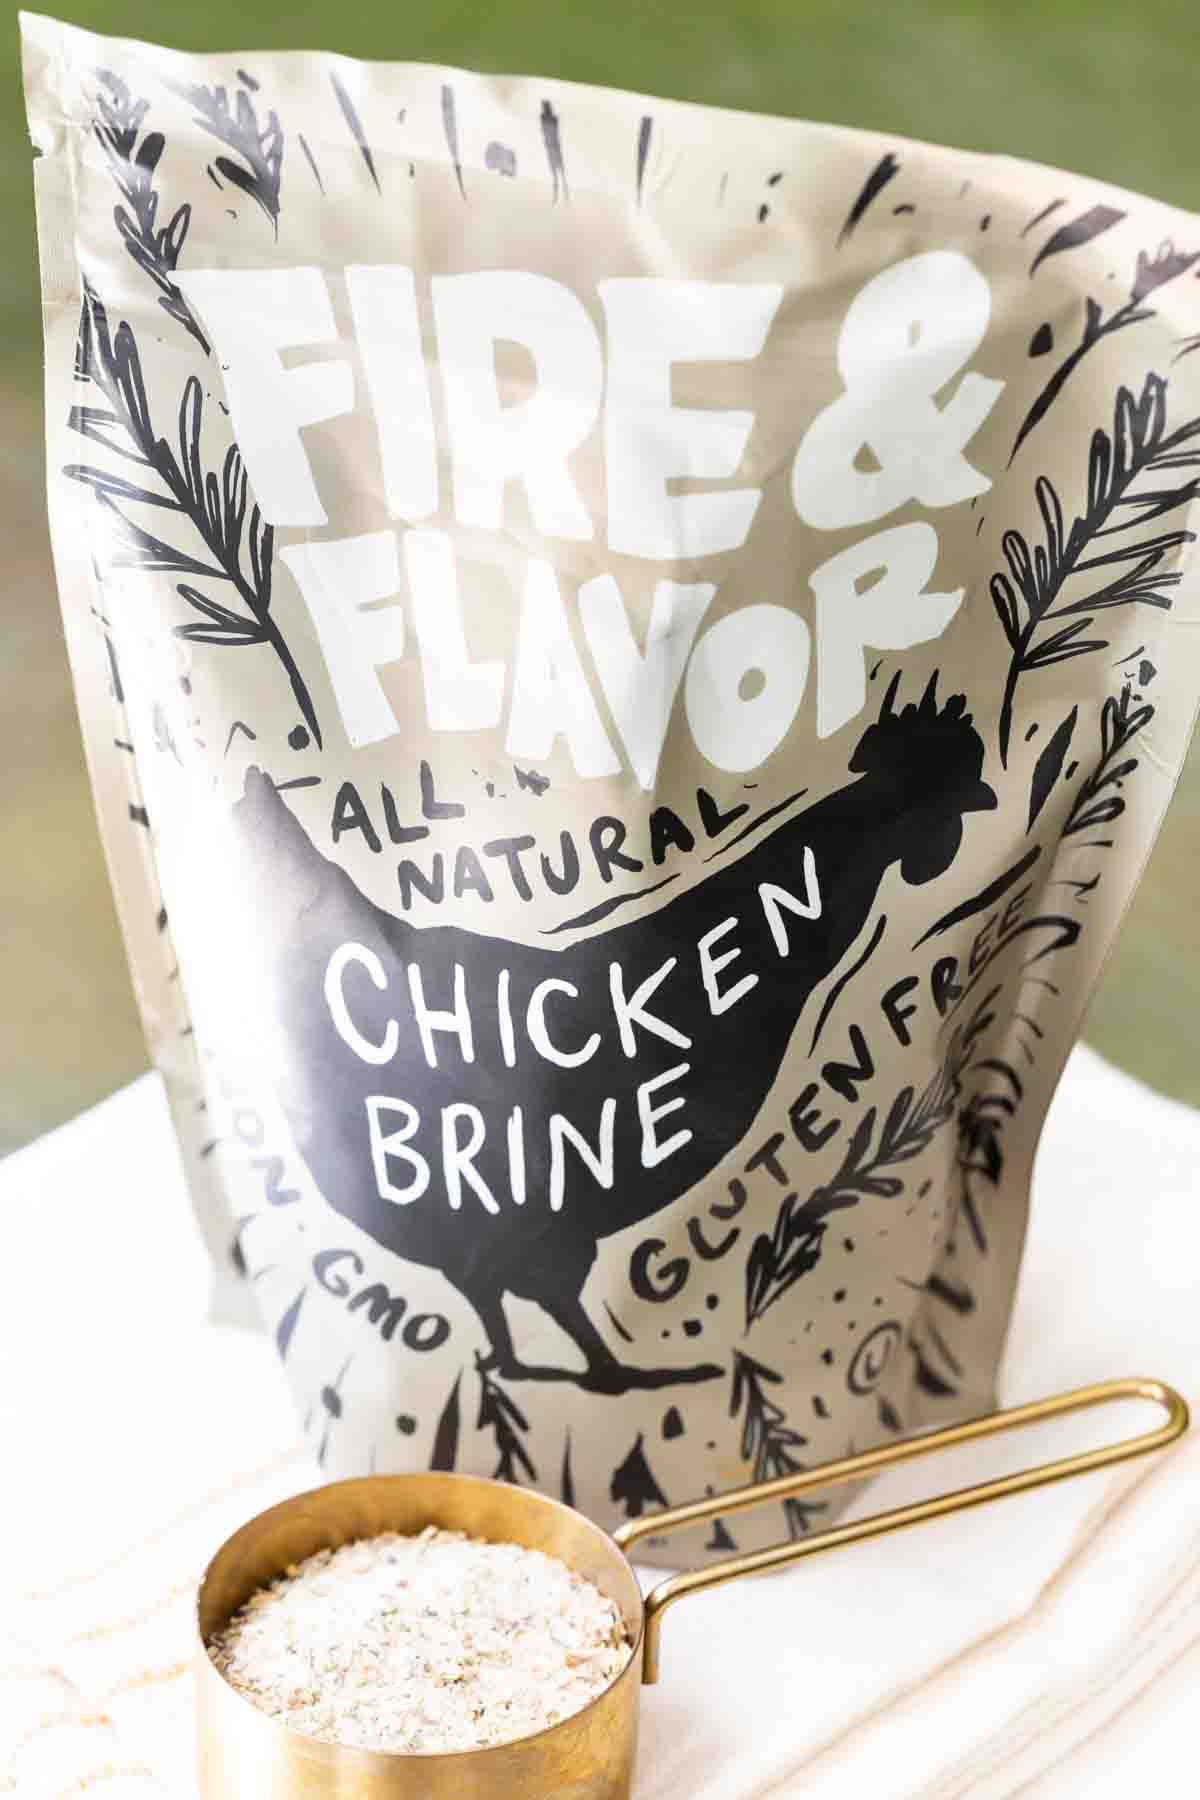 A measuring cup of chicken brine mix next to the package of Fire and Flavor Chicken Brine